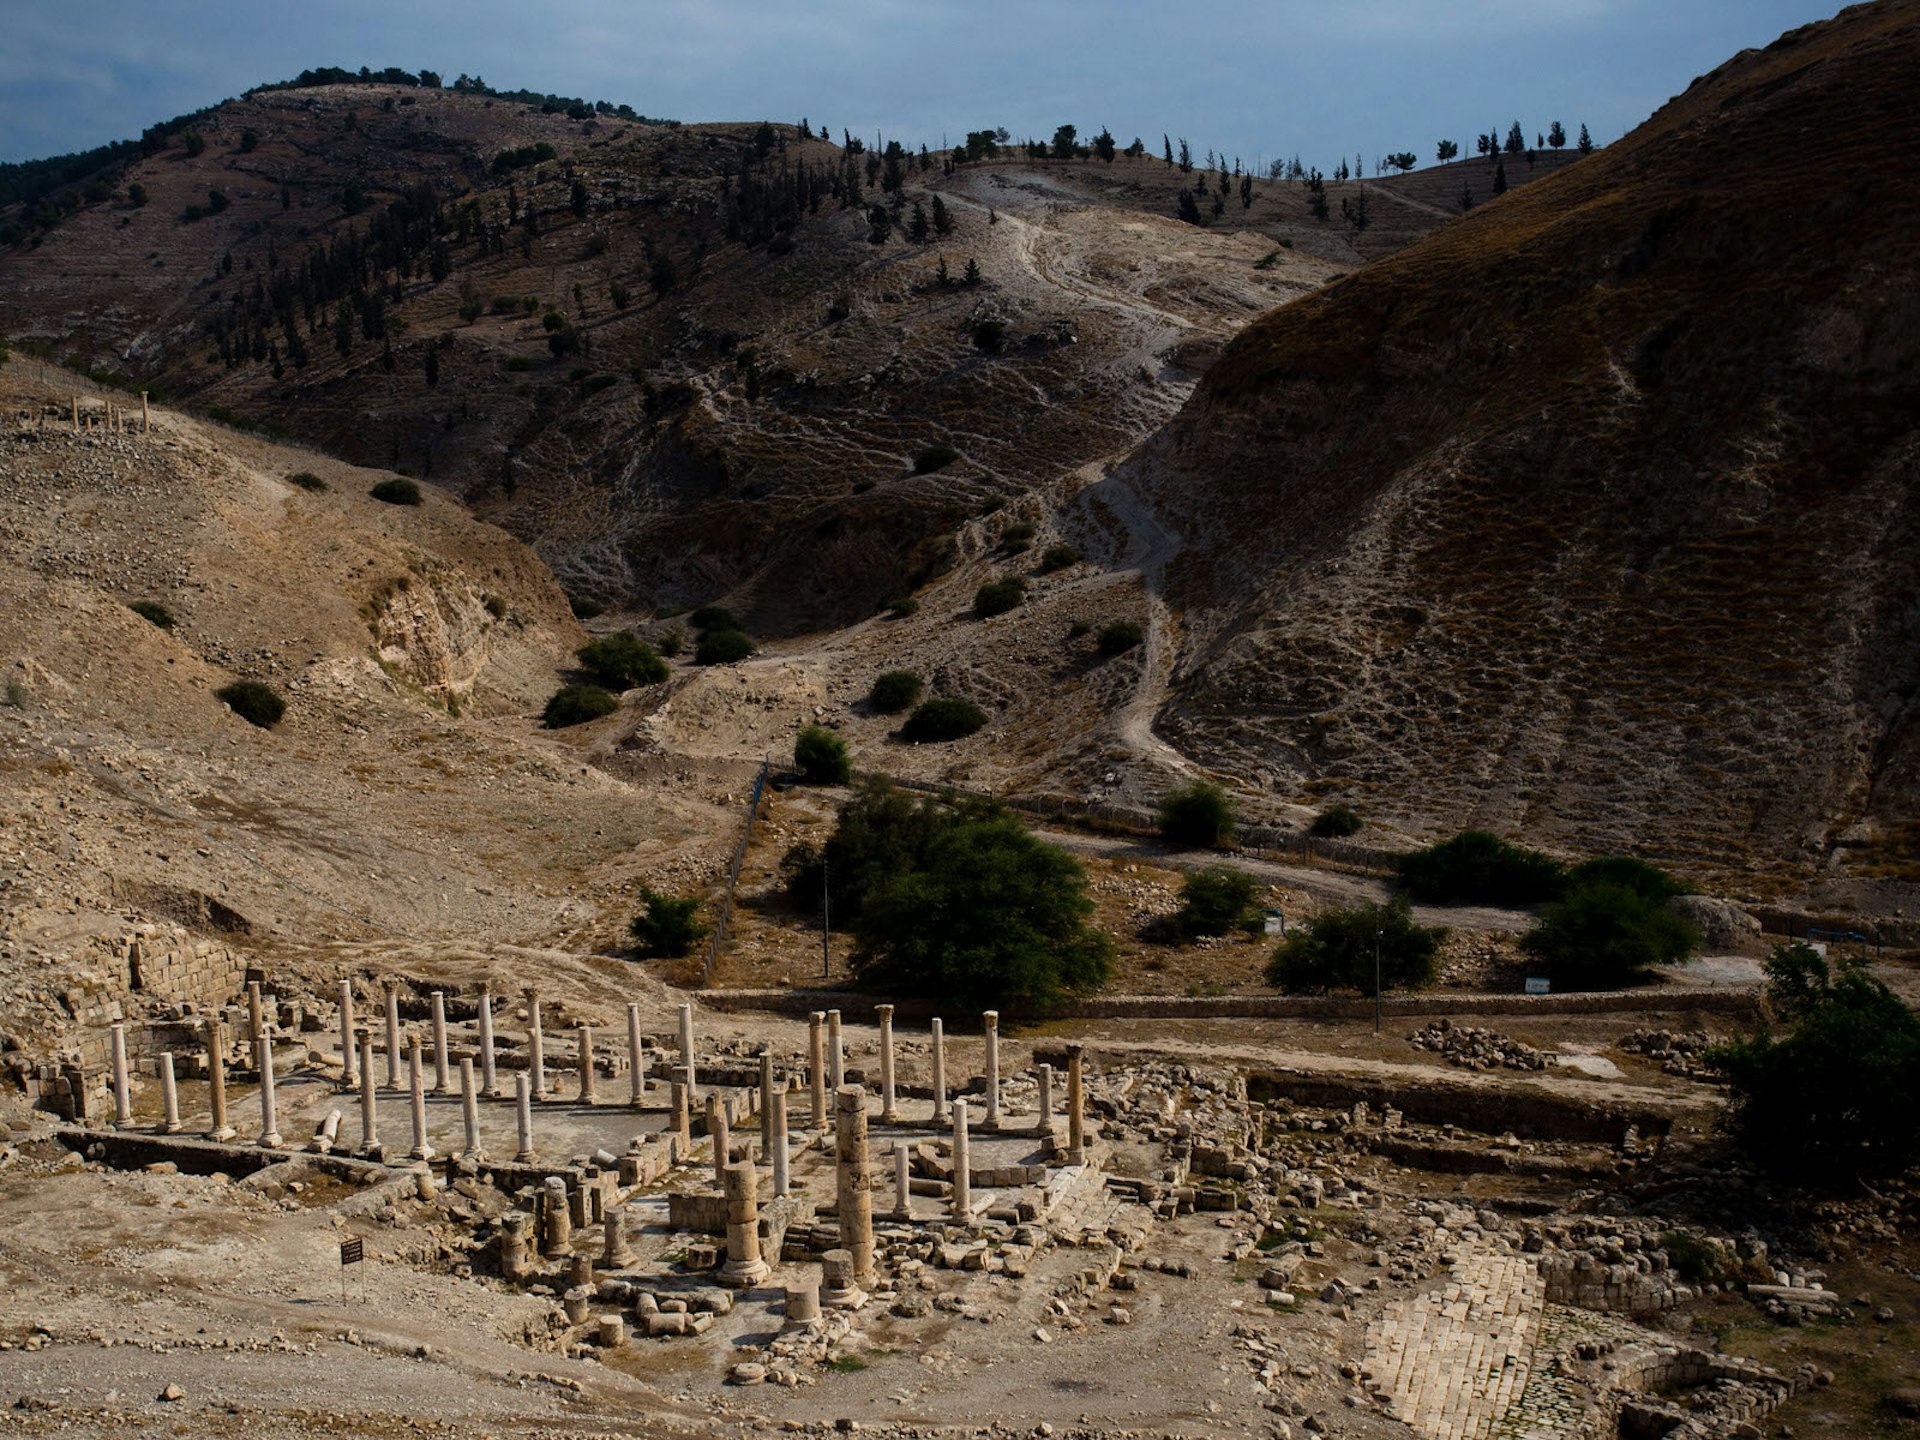 The last remaining ruins of the Pella settlement in Jordan © Stephen Lioy / Lonely Planet